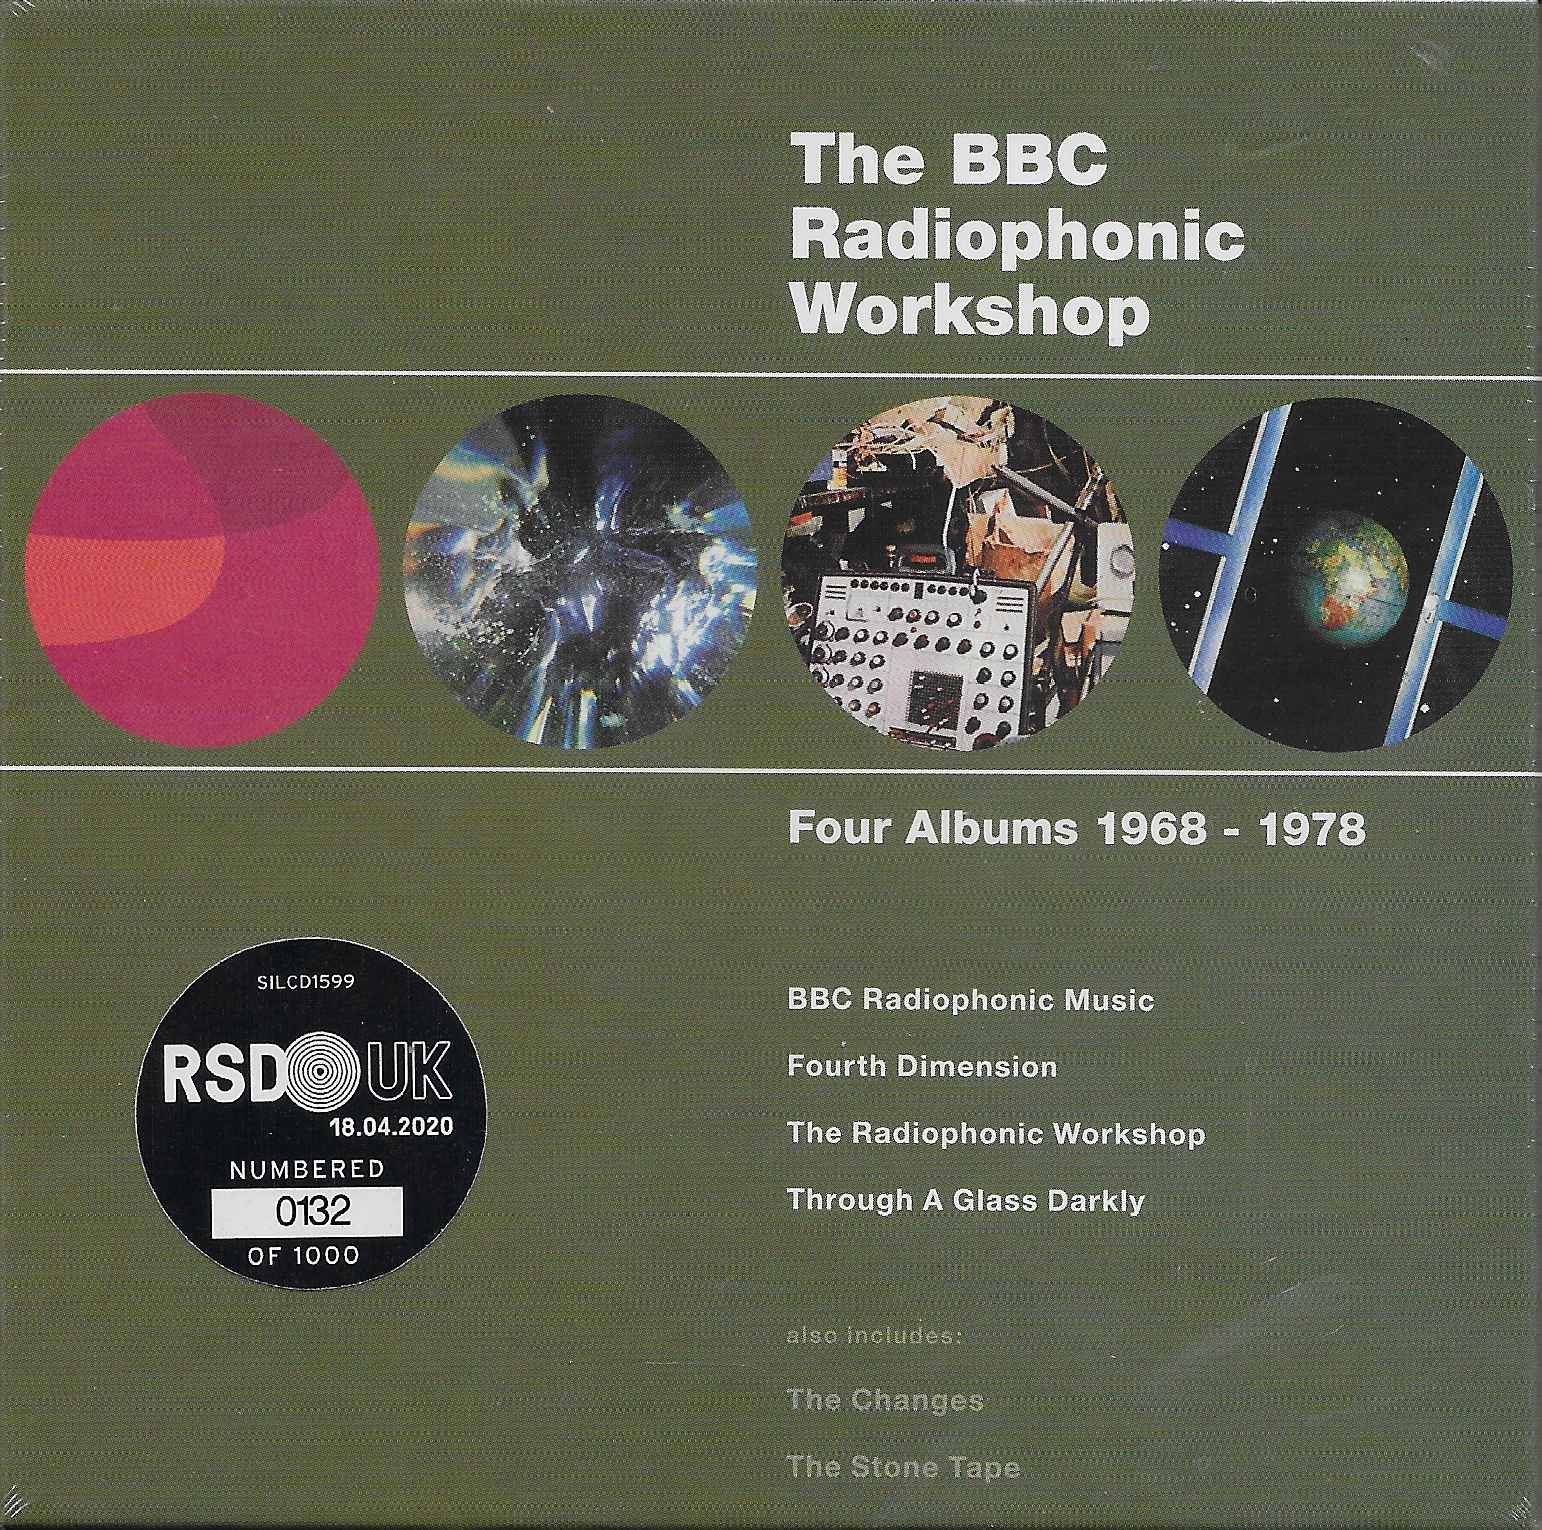 Picture of SILCD 1599 The BBC Radiophonic Workshop 1968 - 1978 by artist Various from the BBC cds - Records and Tapes library